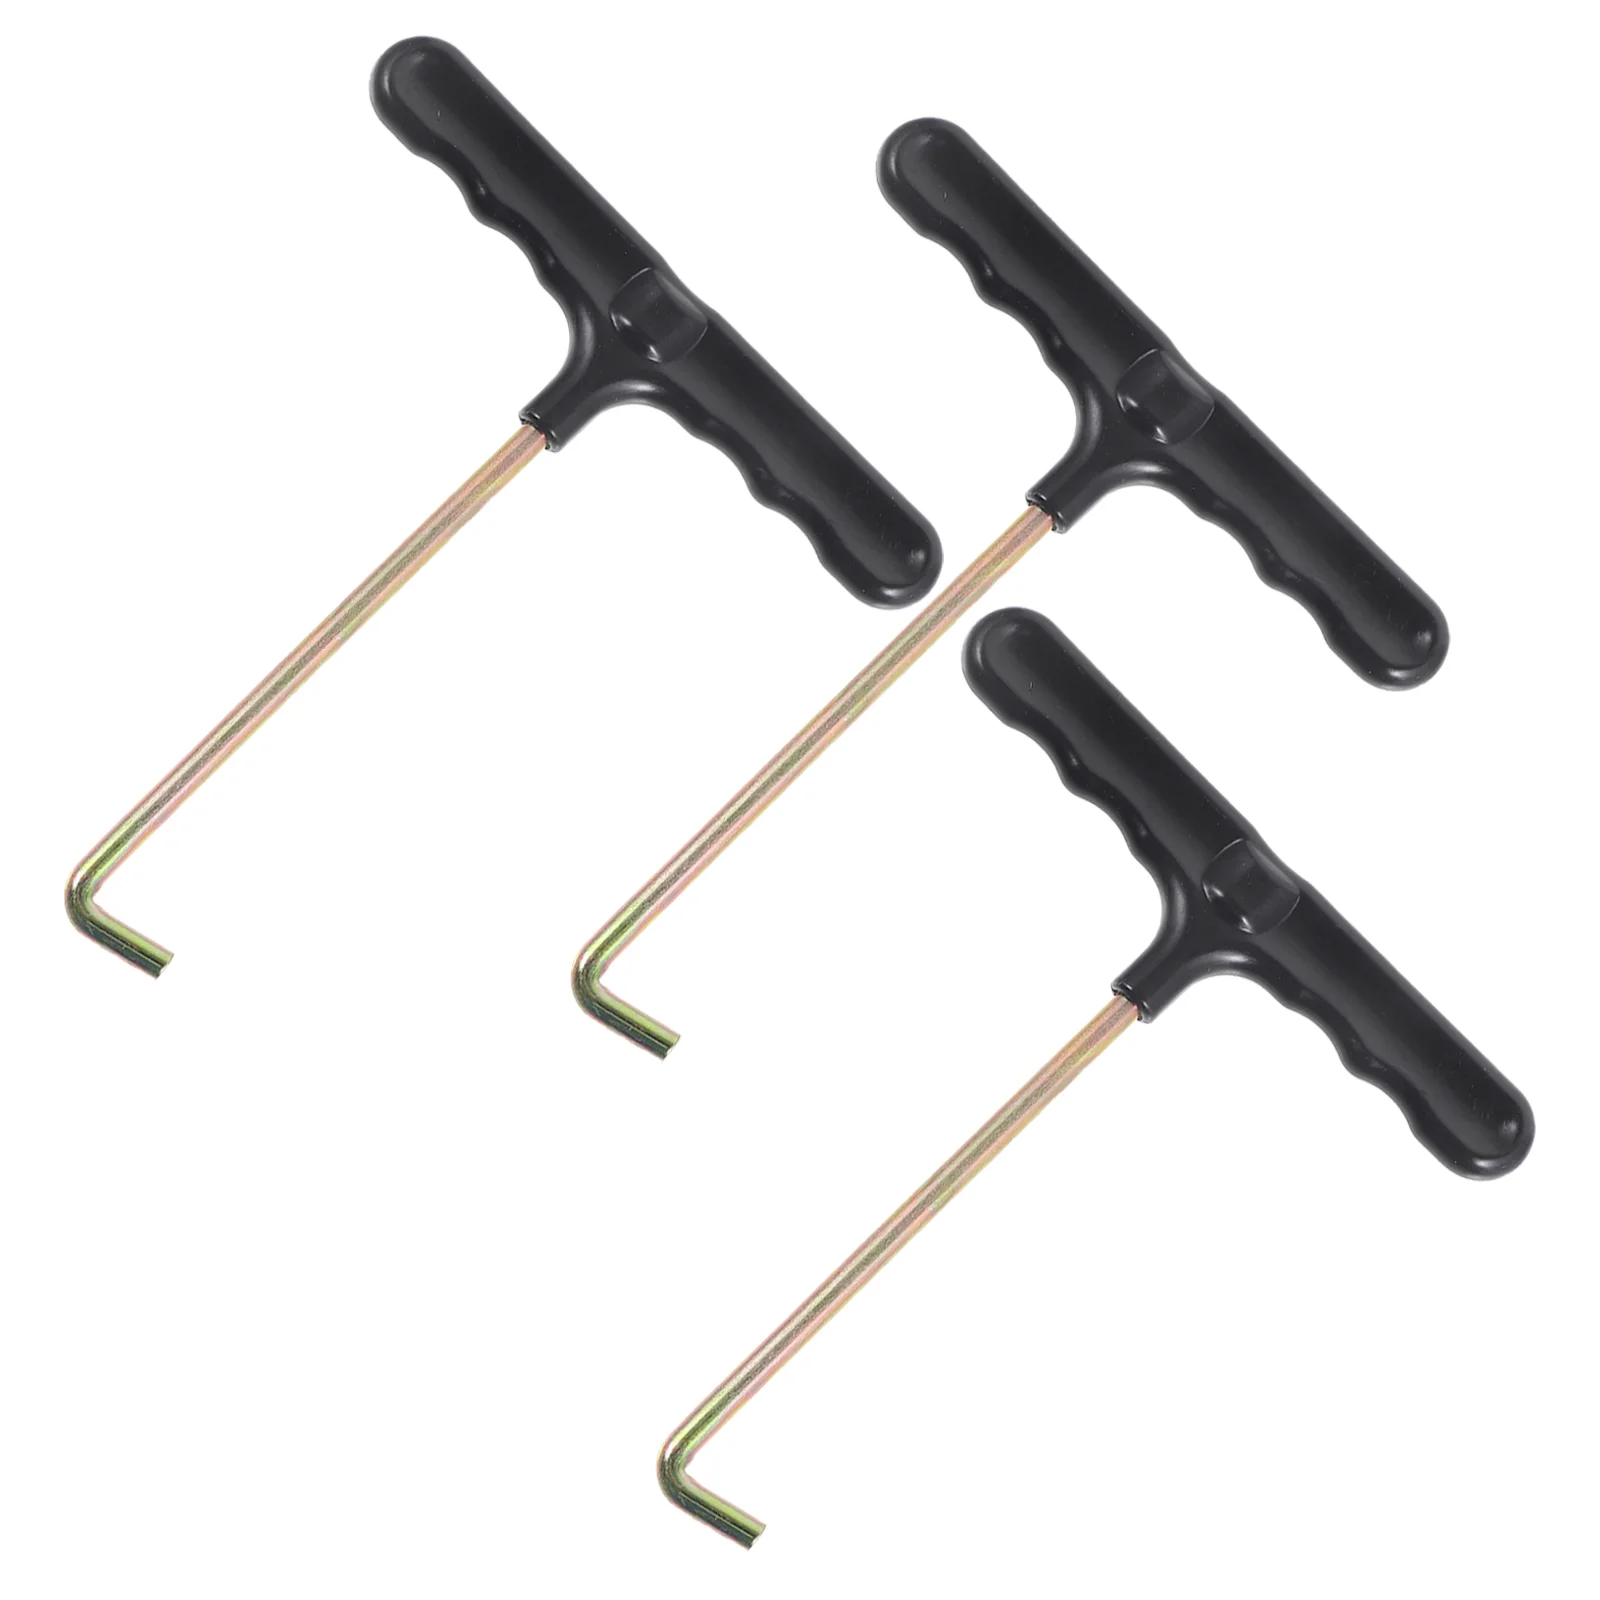 

3 Pcs Skate Shoe Hook Lace Puller Tightener Portable Shoelace Pullers Ice Shoelaces